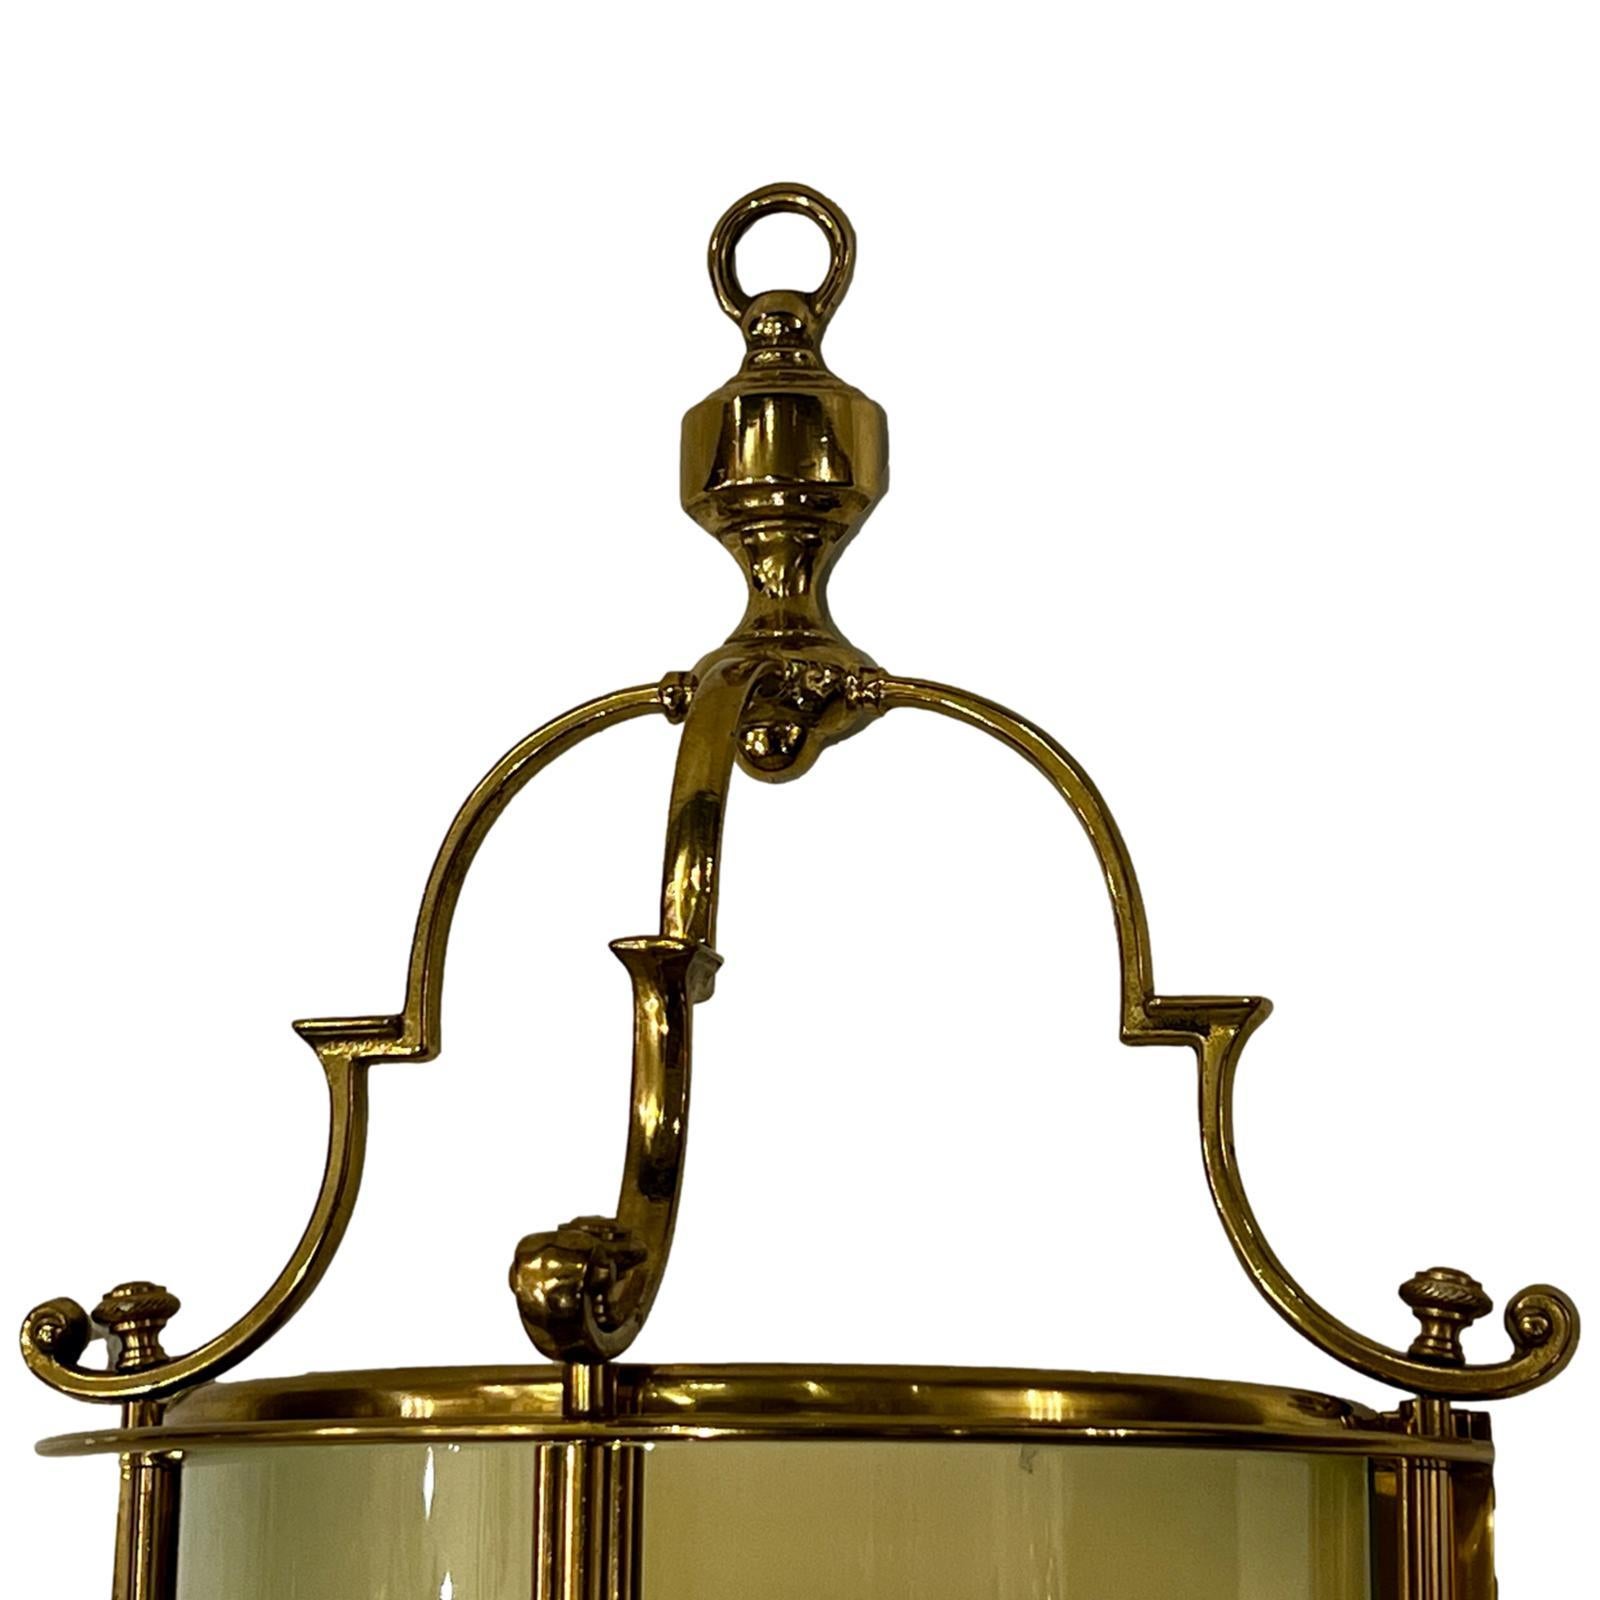 Pair of English bronze wall lanterns with glass panels and two interior lights each. 

Measurements:
Height: 19